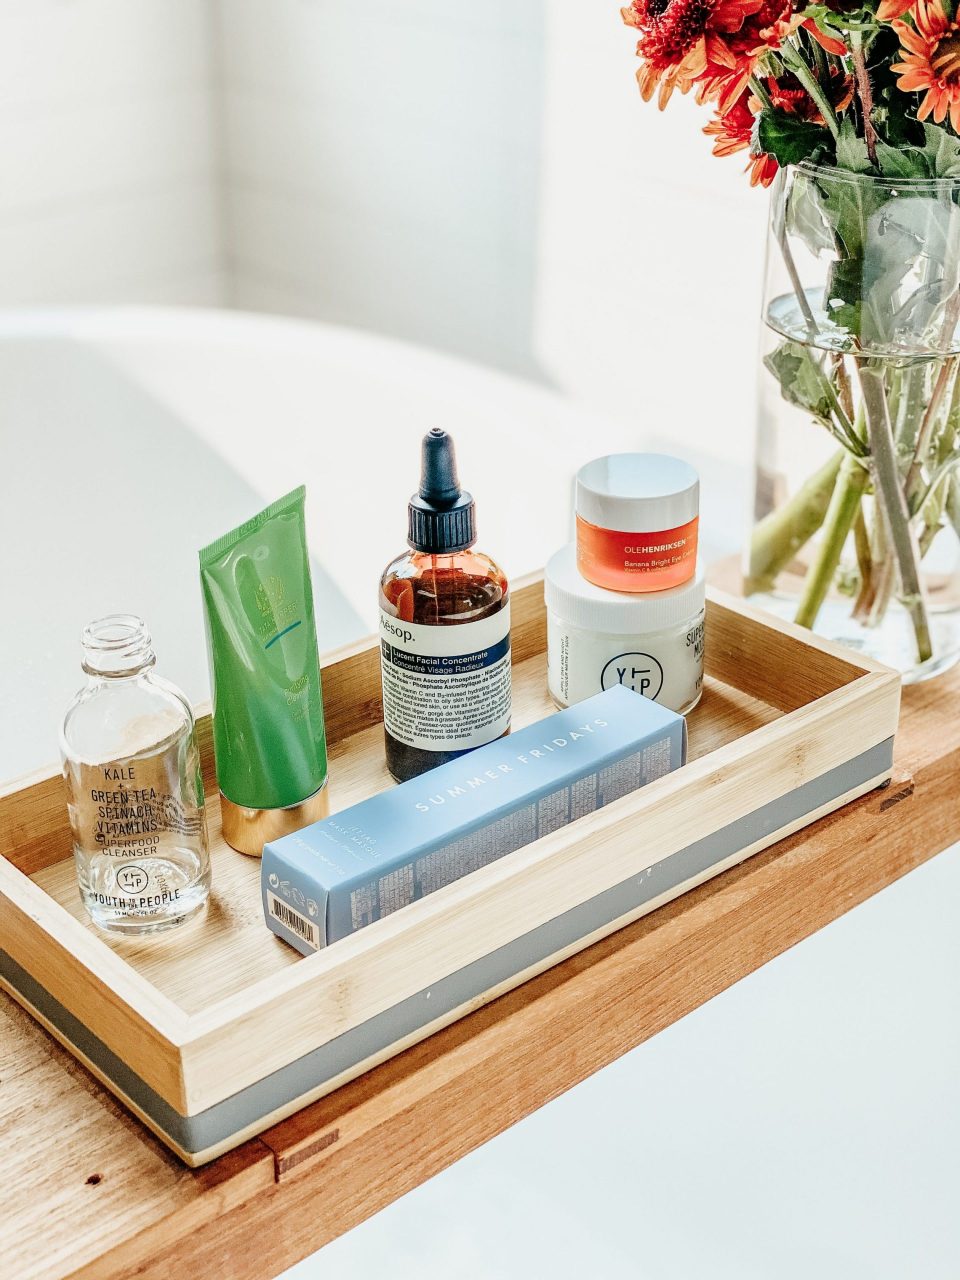 Array of beauty products on a bath tray next to a vase of orange flowers